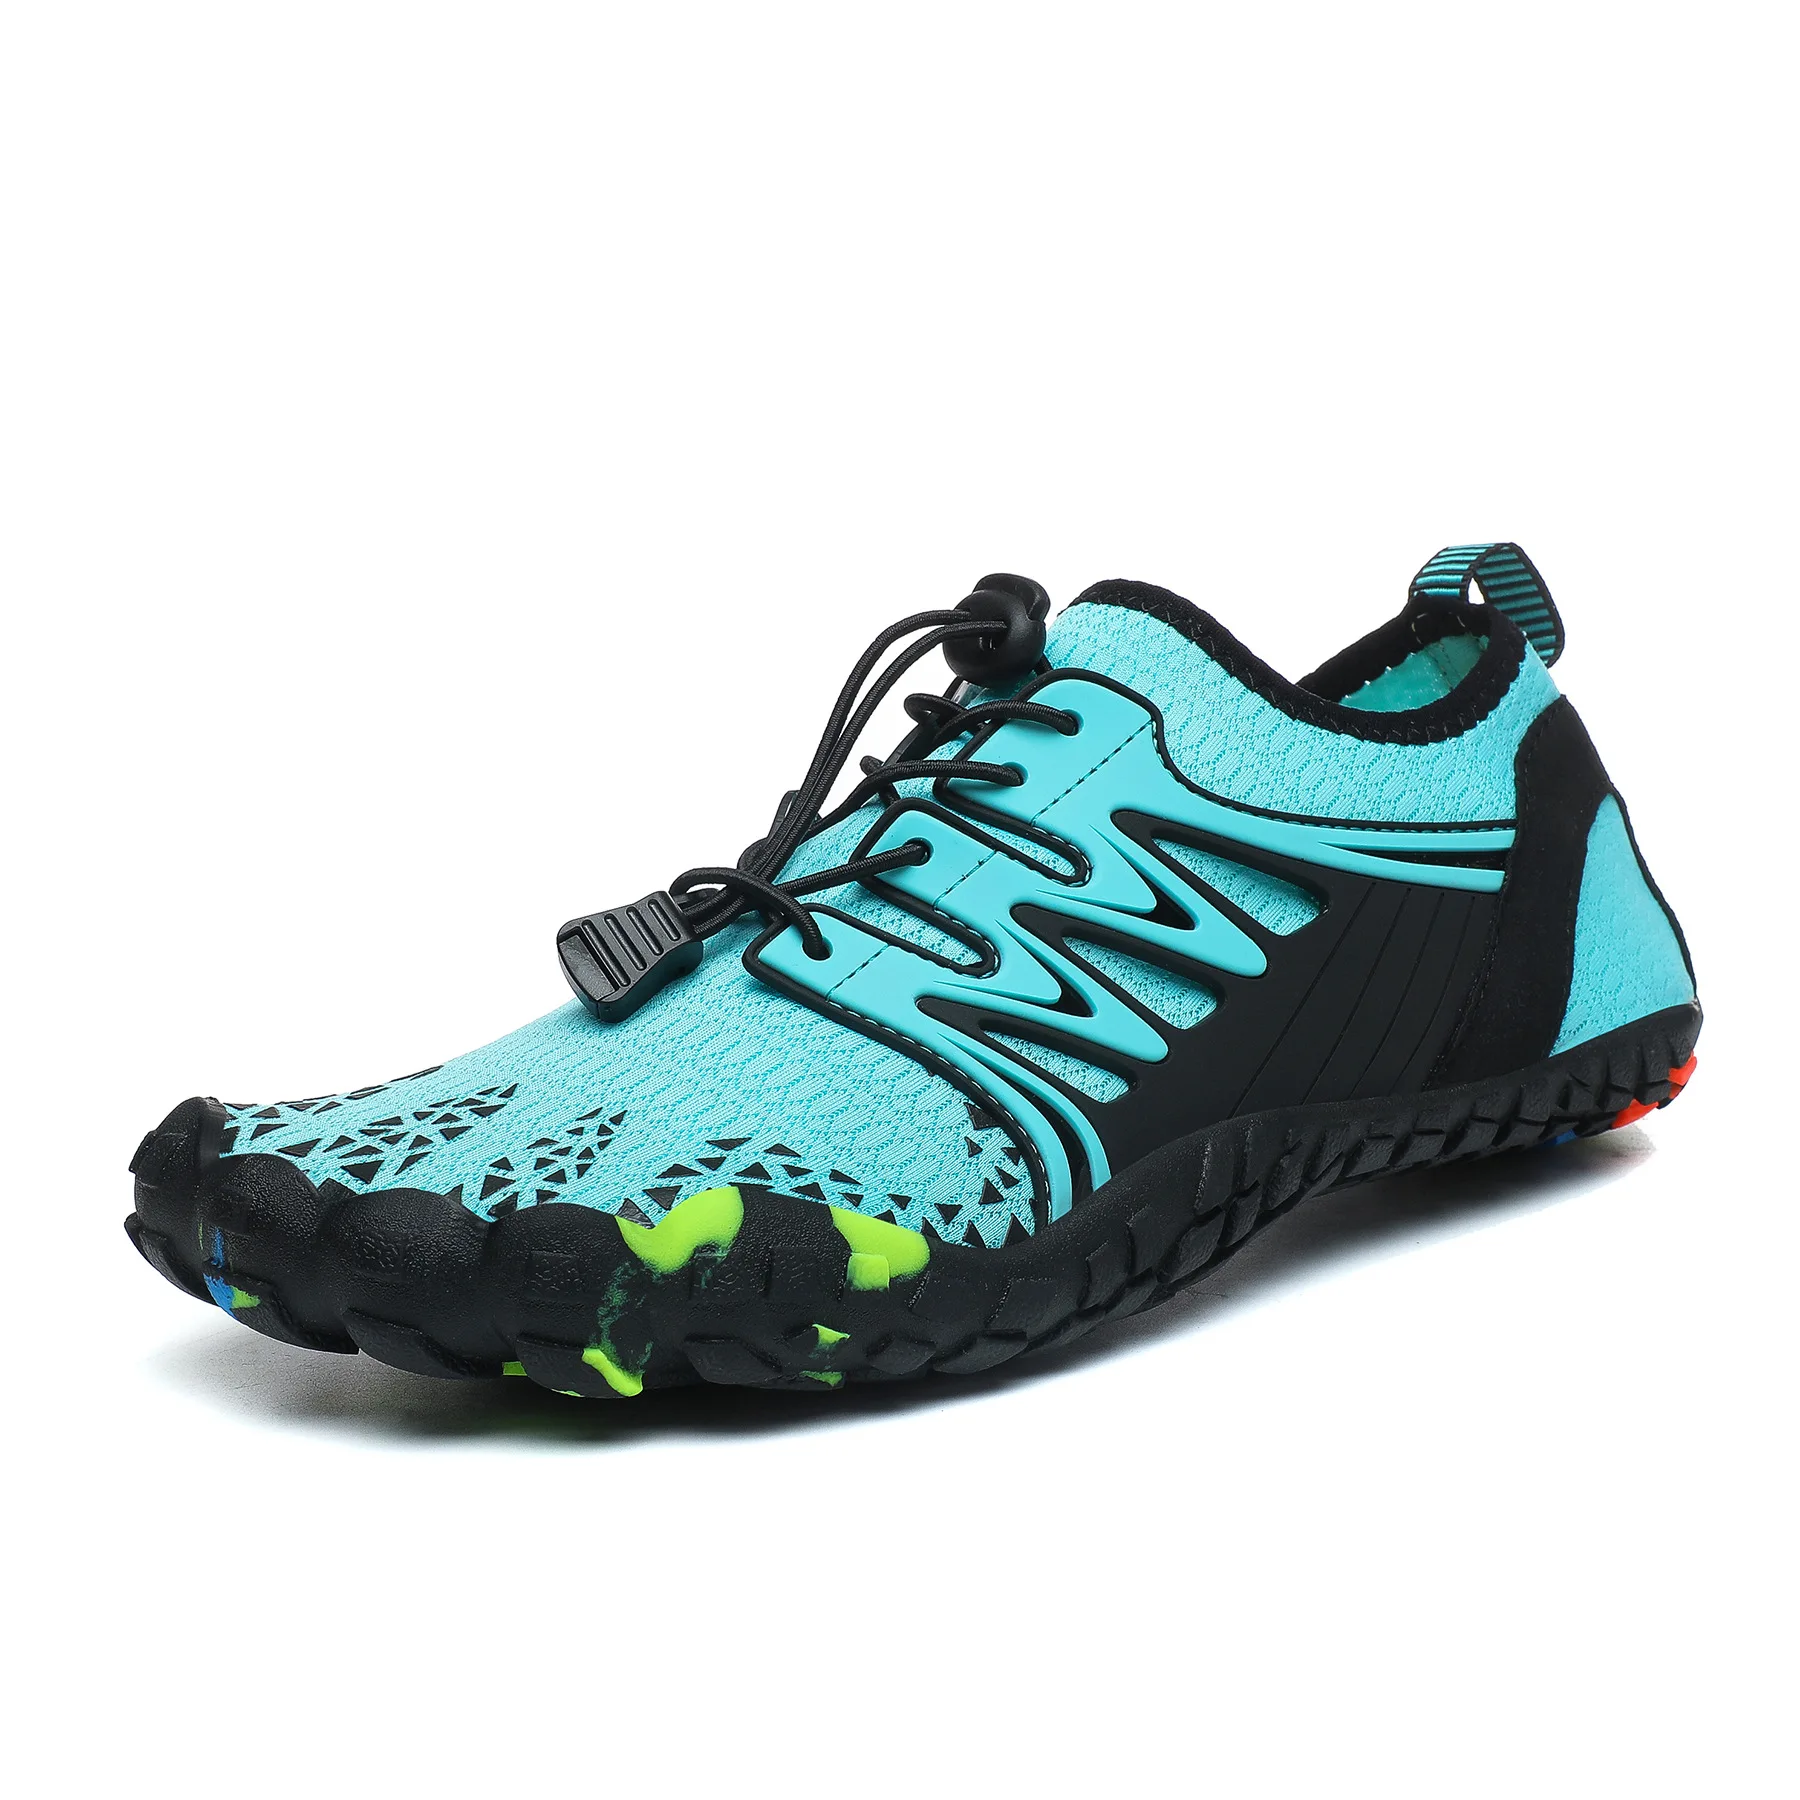 Enlarge New Quick-Dry Water Shoes Breathable Upstream Wading Shoes Non Slip Outdoor Comfortable Beach Barefoot Surfing Aqua Shoes